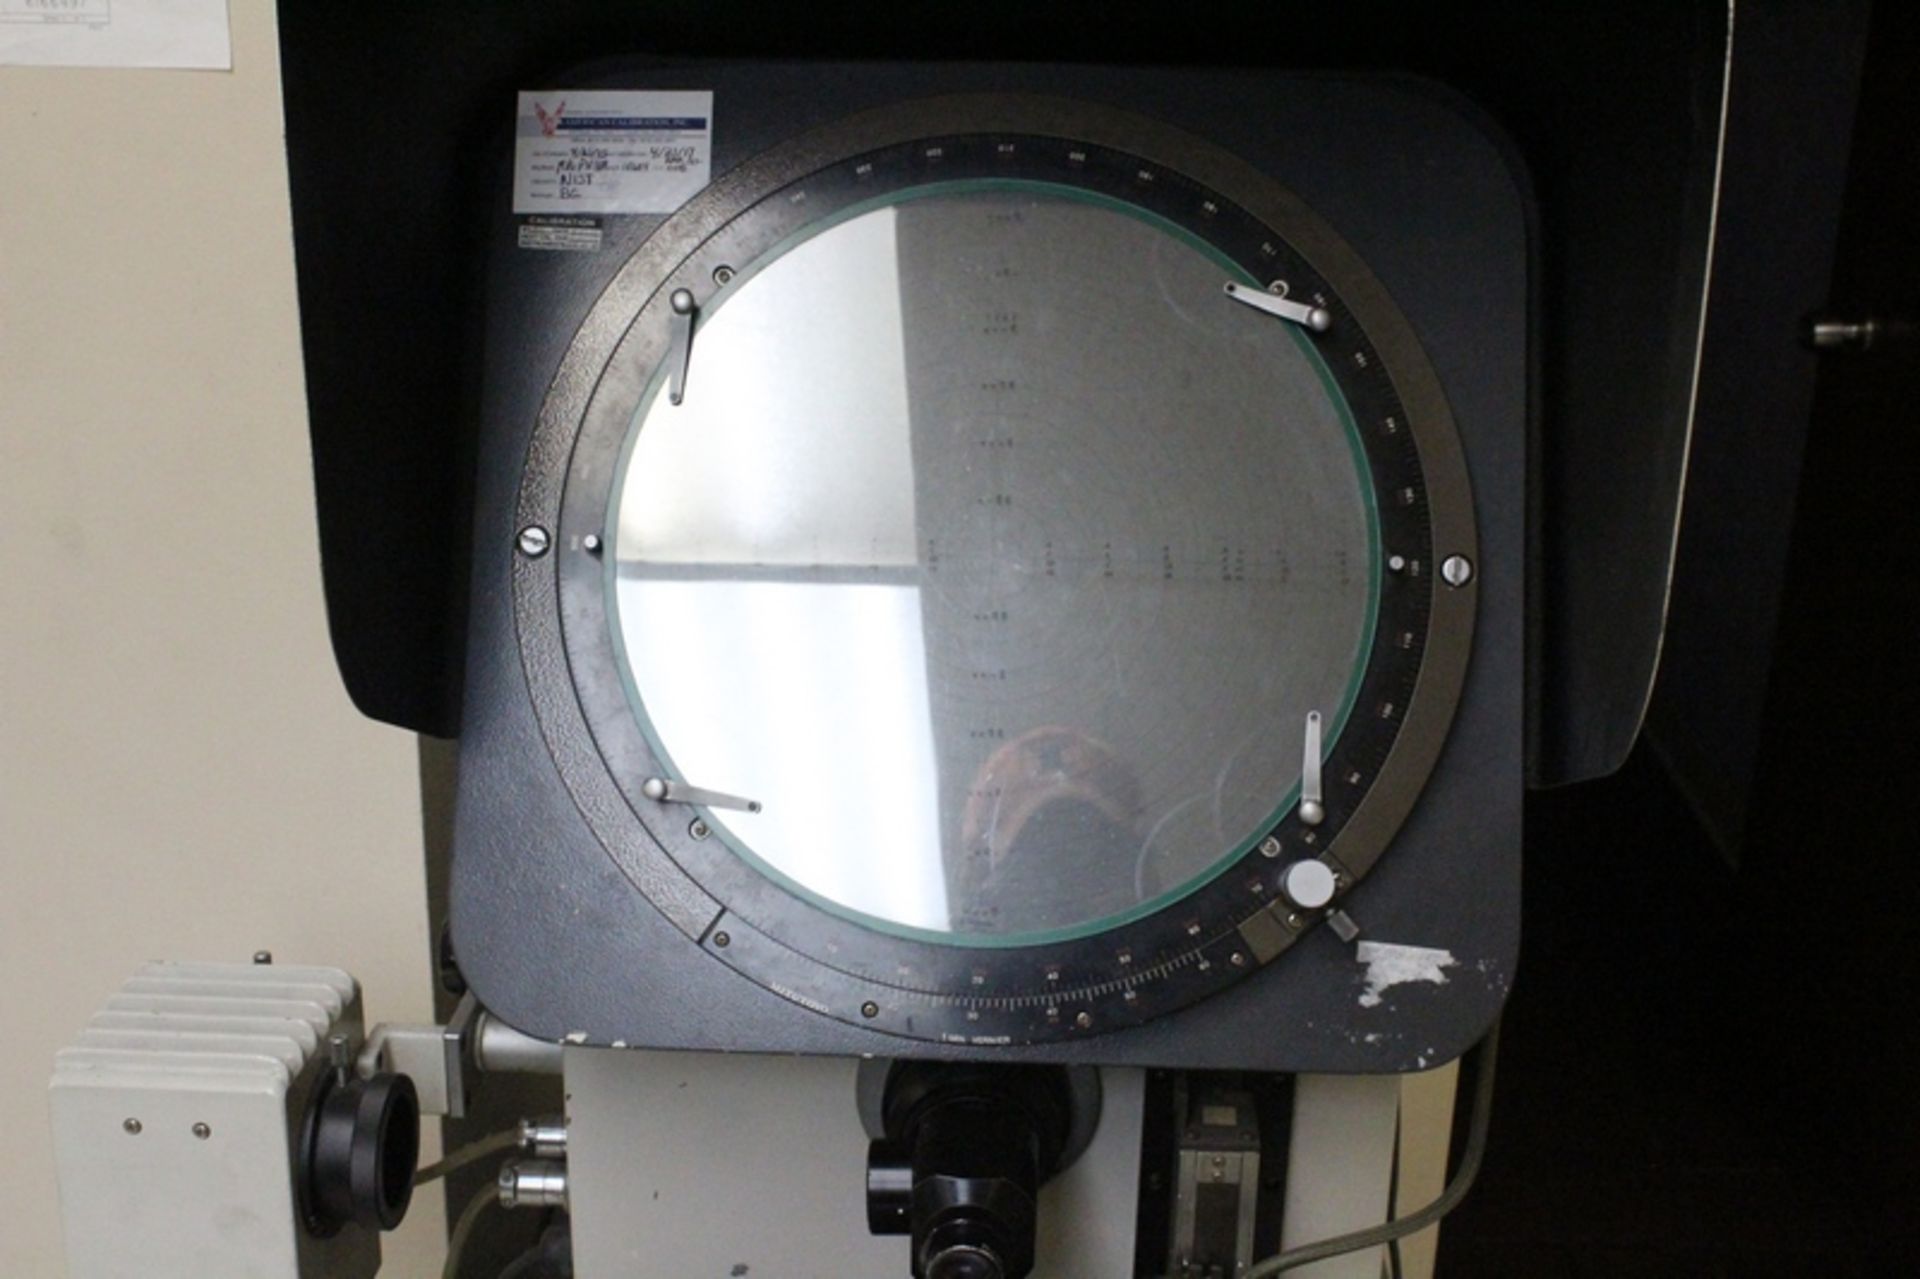 MITUTOYO 13” TYPE PH-350 OPTICAL COMPARATOR, S/N 10664, WITH MITUTOYO 2-AXIS DIGITAL READOUT, - Image 3 of 5